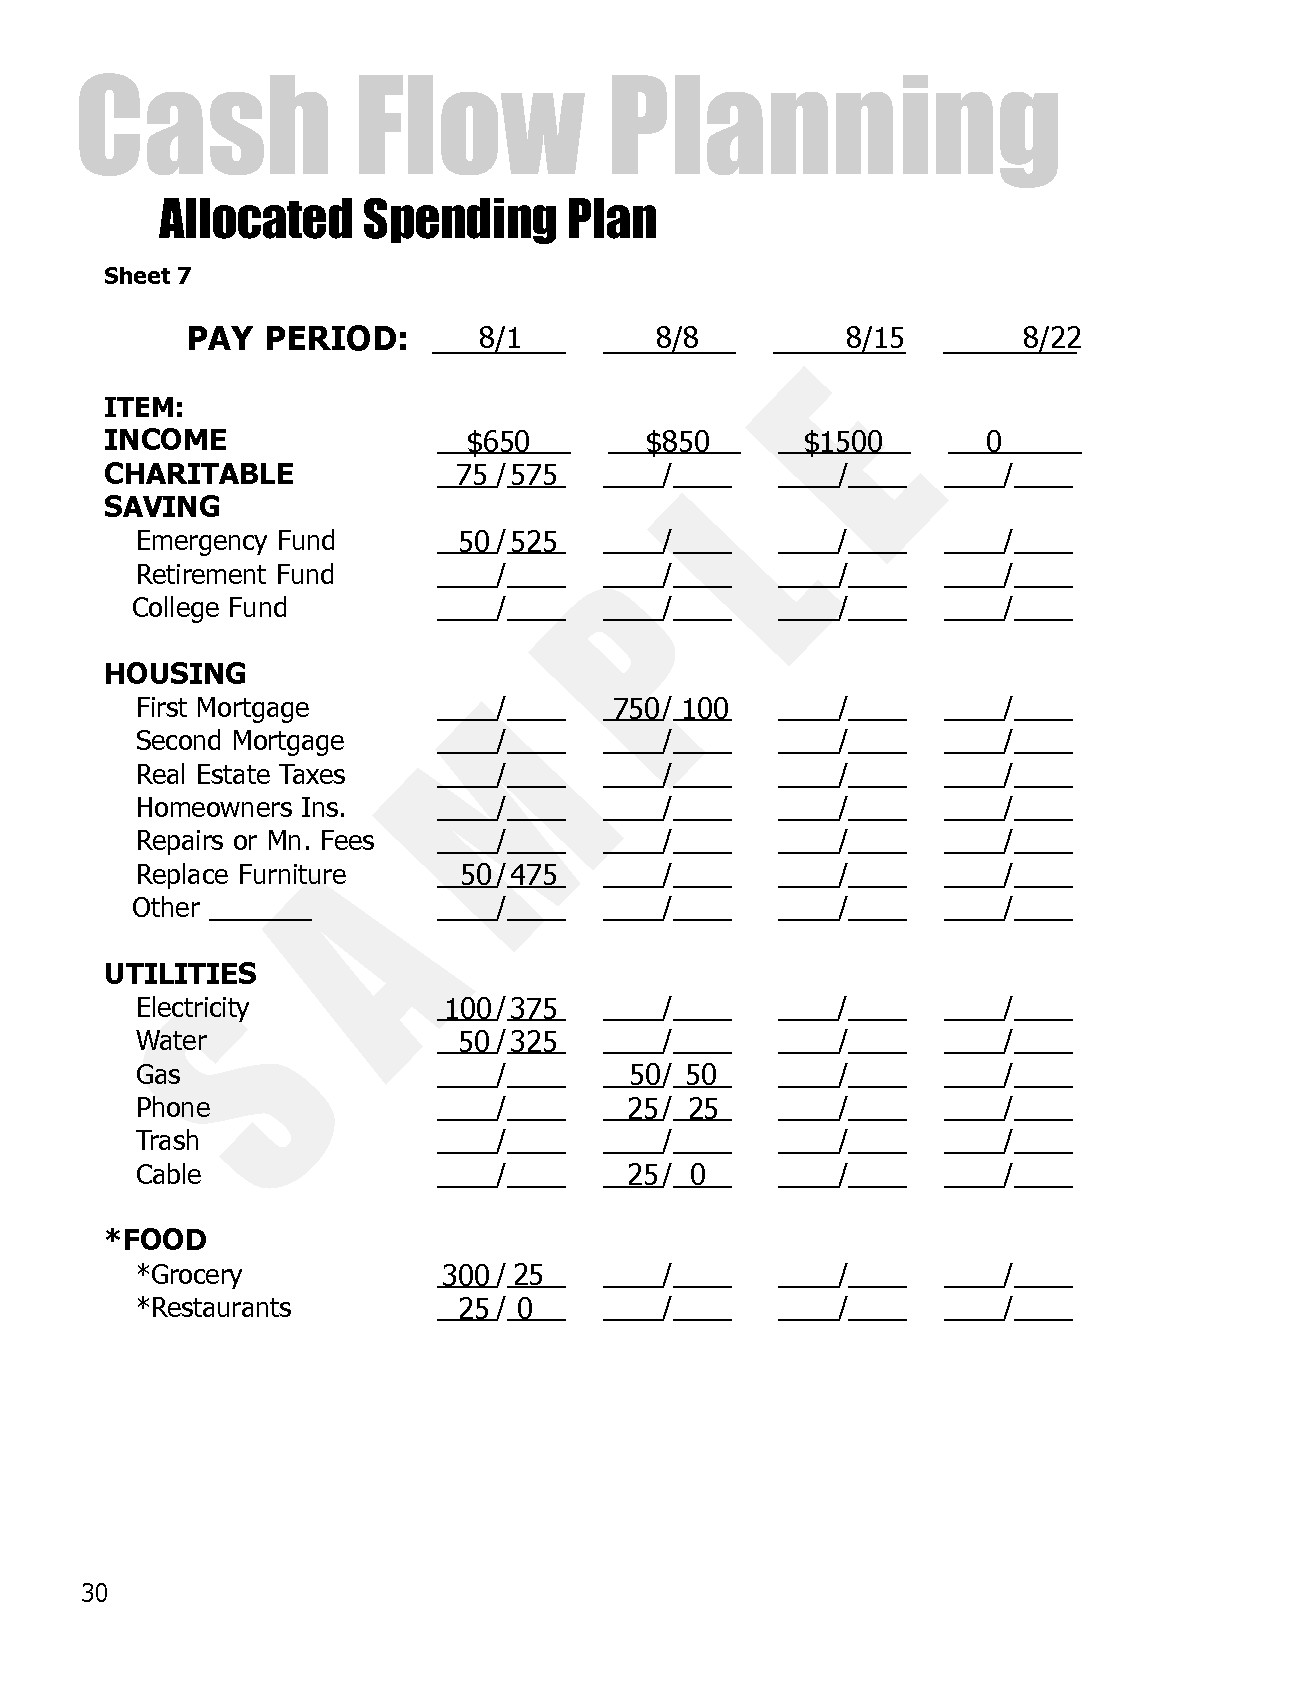 How To Use Dave Ramsey S Allocated Spending Plan Finance Document Spreadsheet